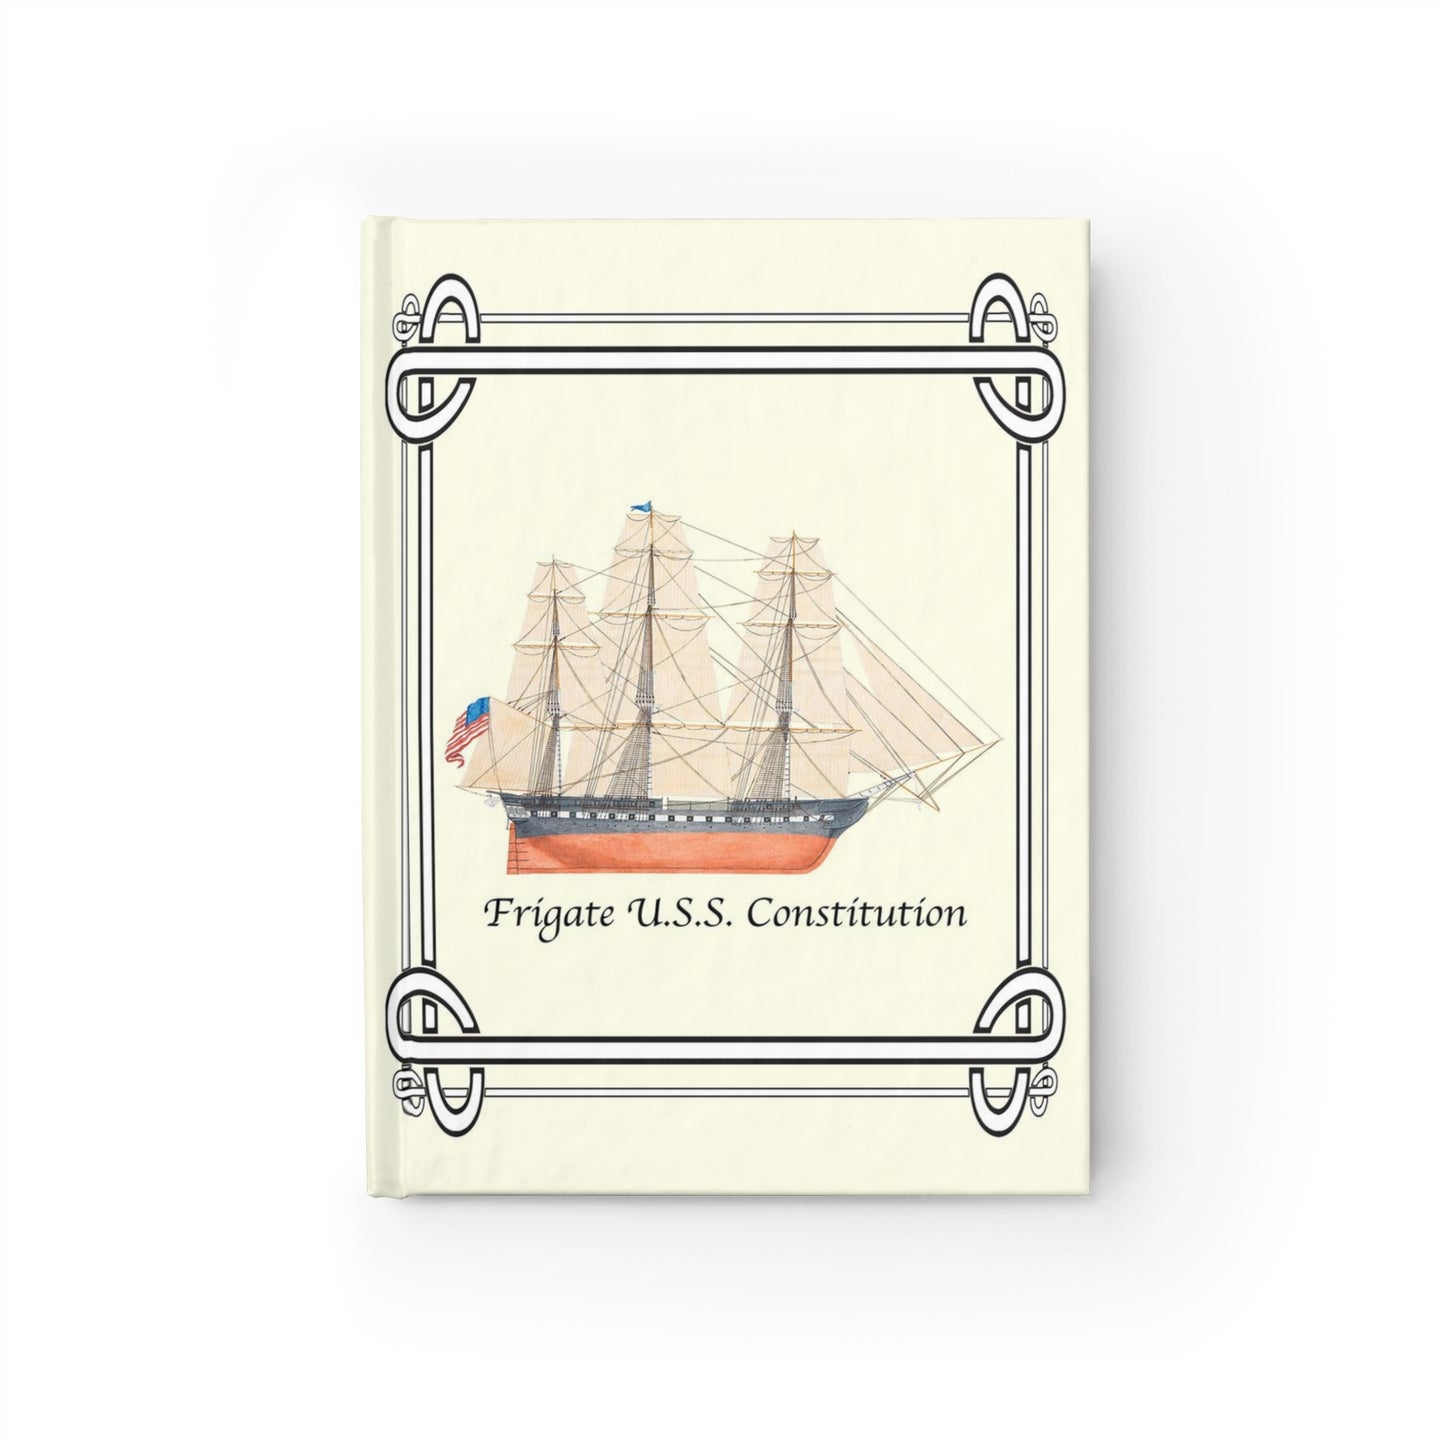 The Frigate U.S.S. Constitution was built in Boston, Massachusetts in 1797 and is the oldest commissioned warship afloat in the world. It is often called by its nickname,“Old Ironsides”. 